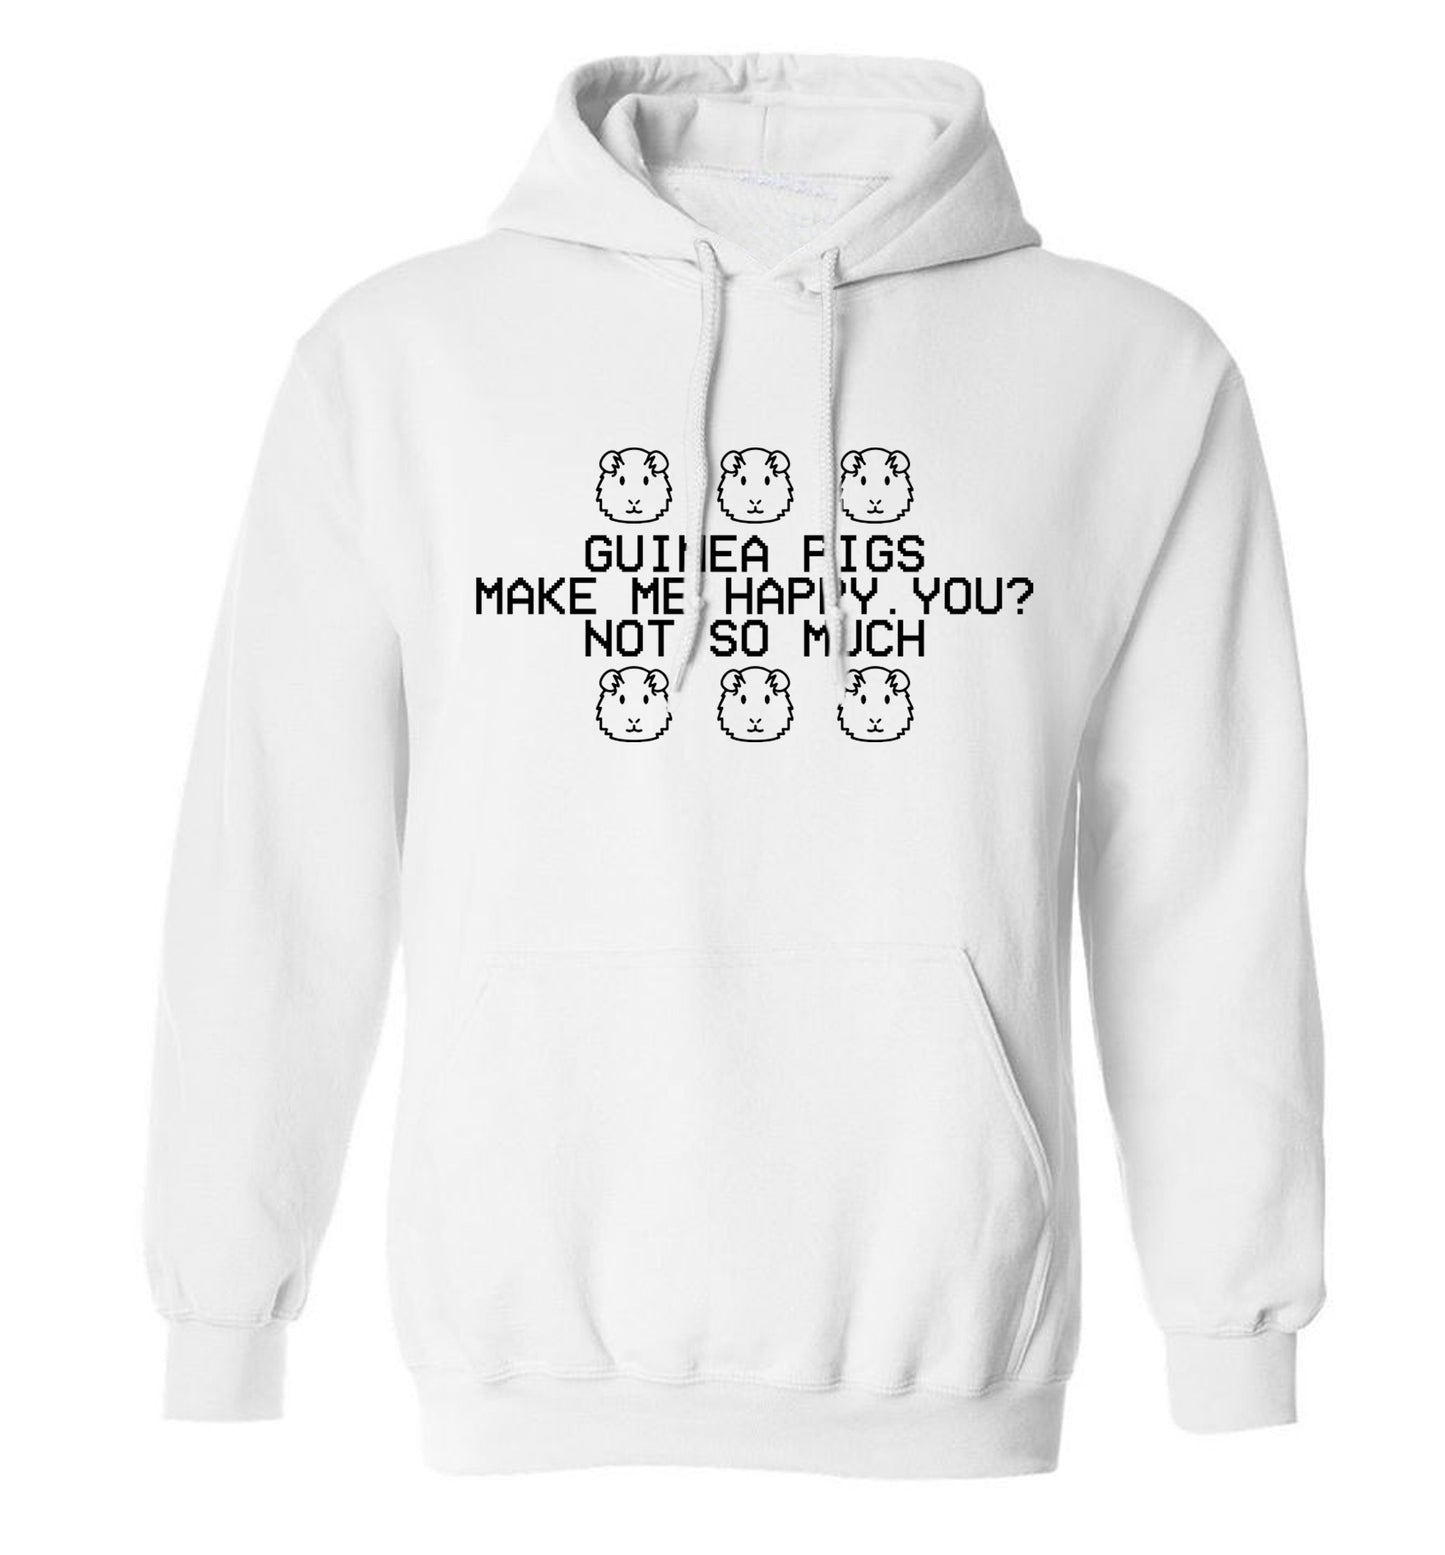 Guinea pigs make me happy, you not so much adults unisex white hoodie 2XL